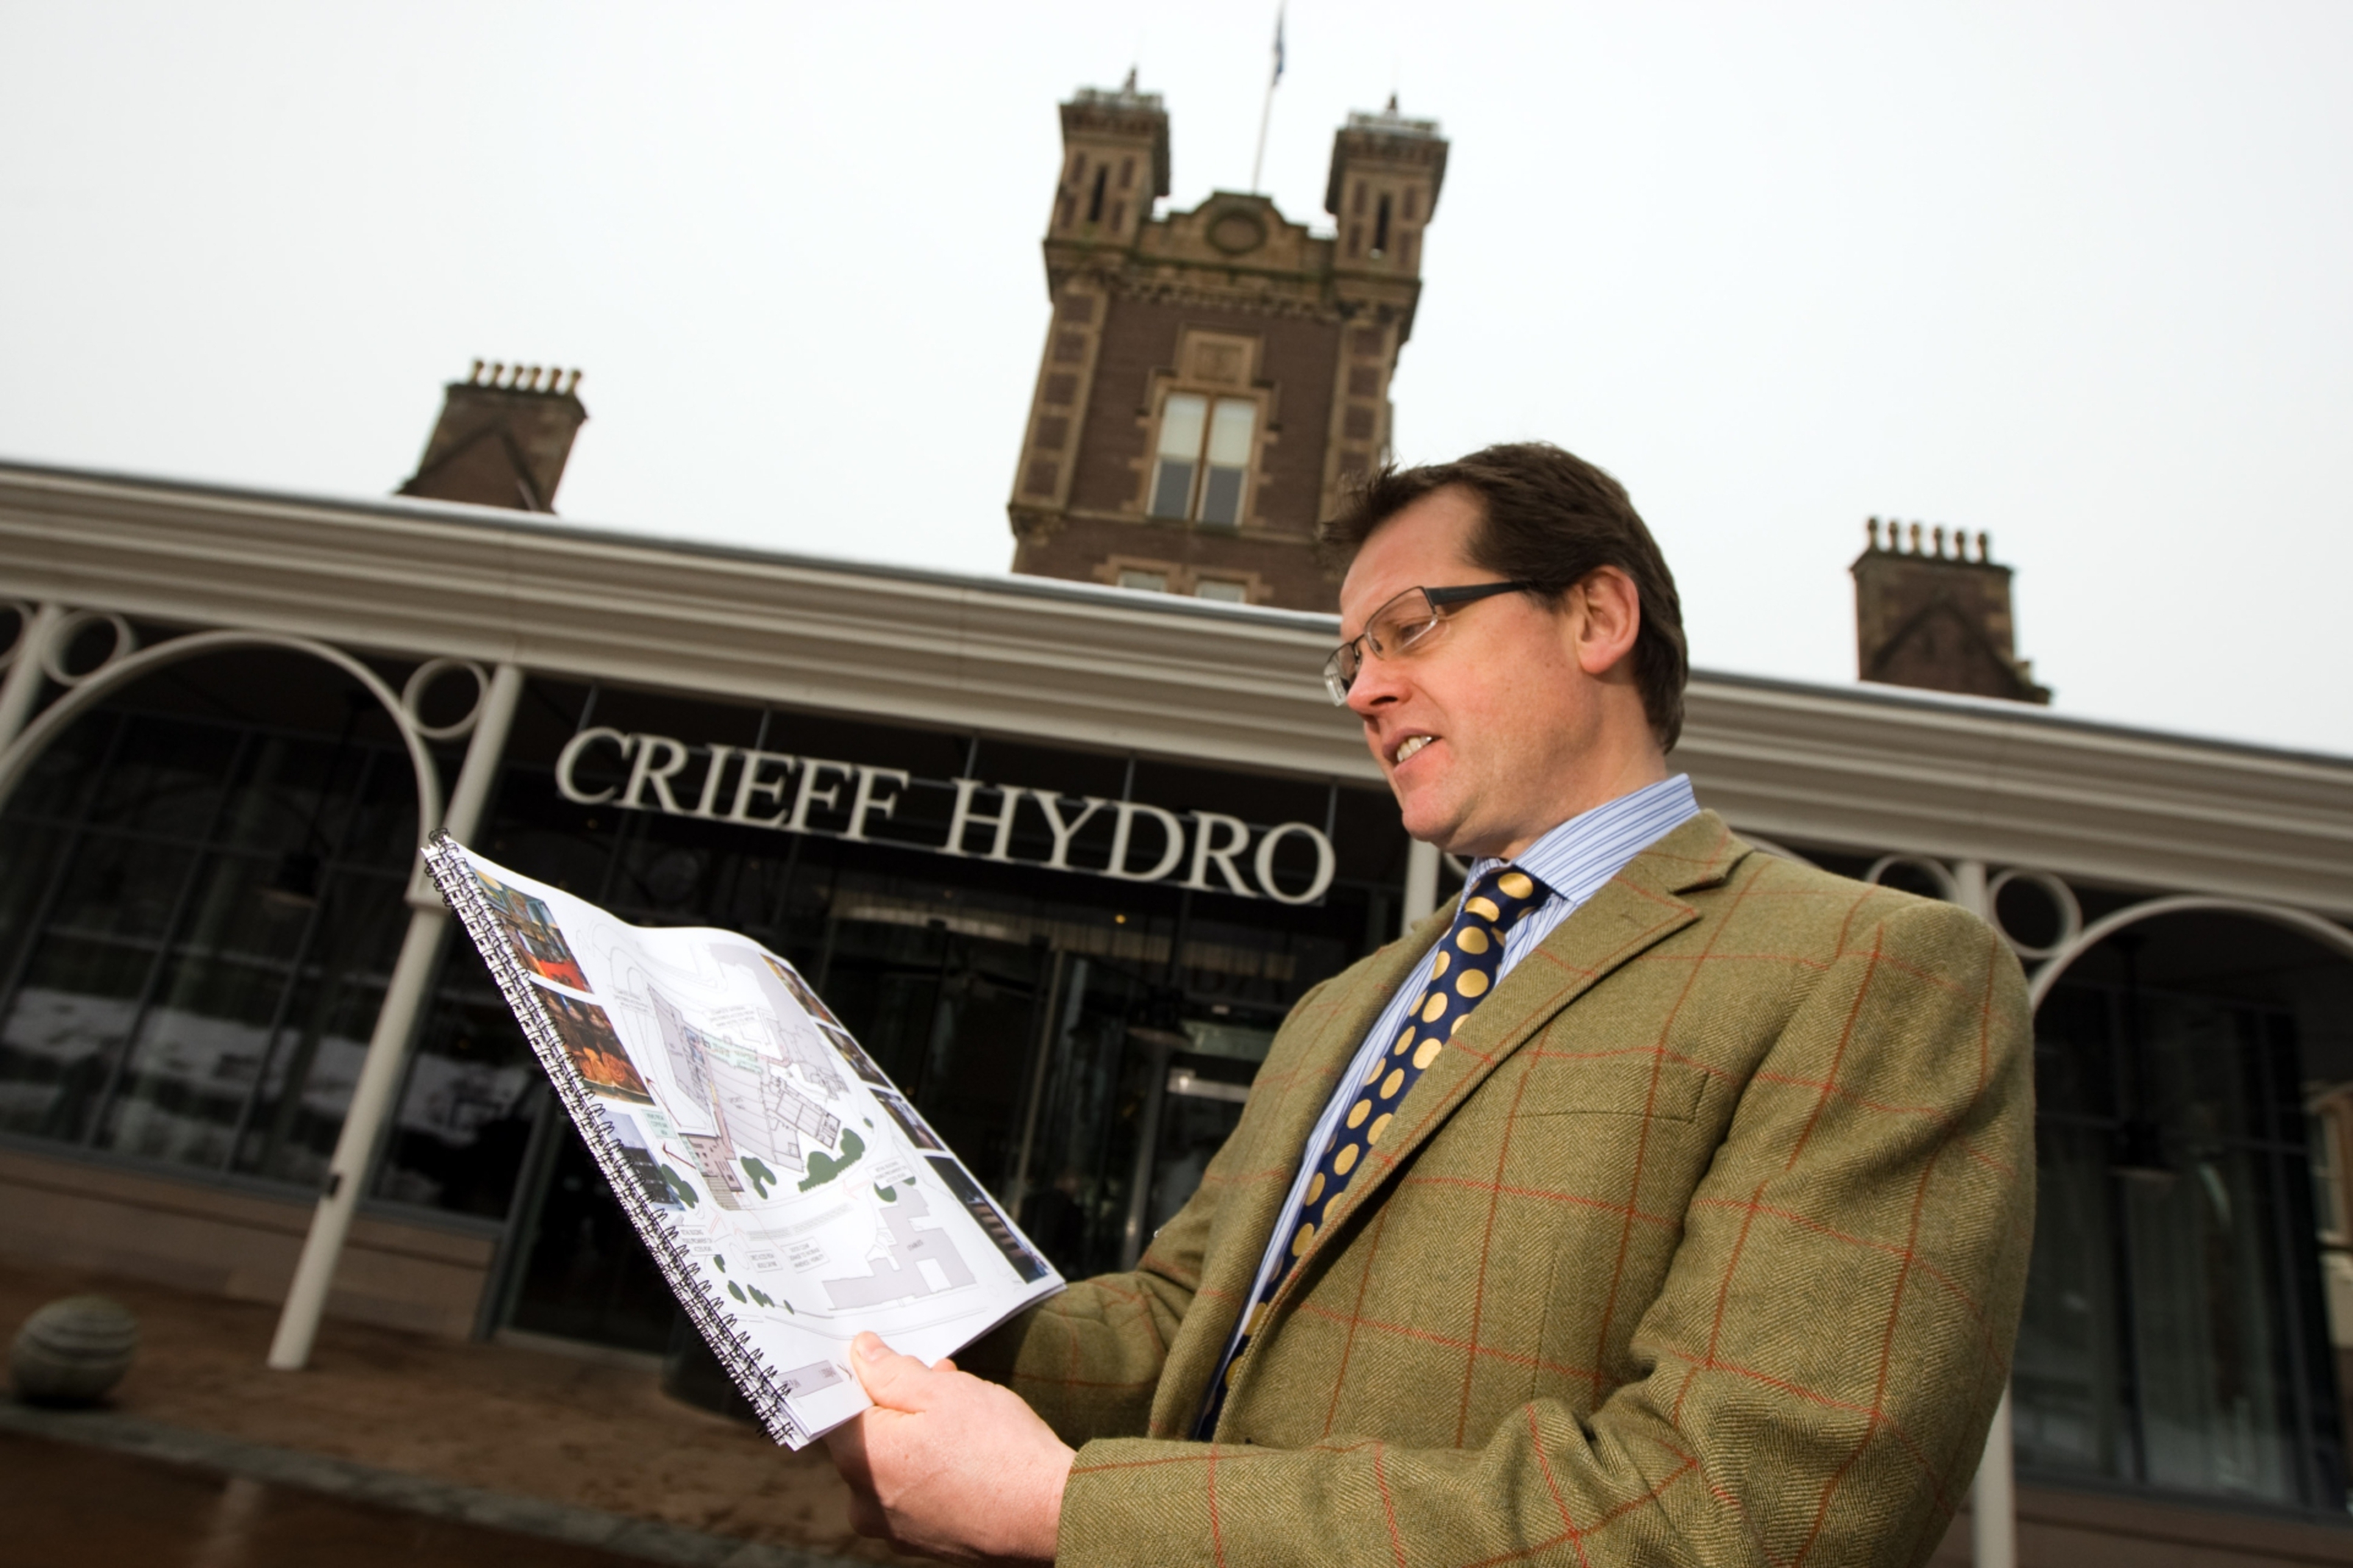 Stephen Leckie, Chief Executive at Crieff Hydro with development plans.